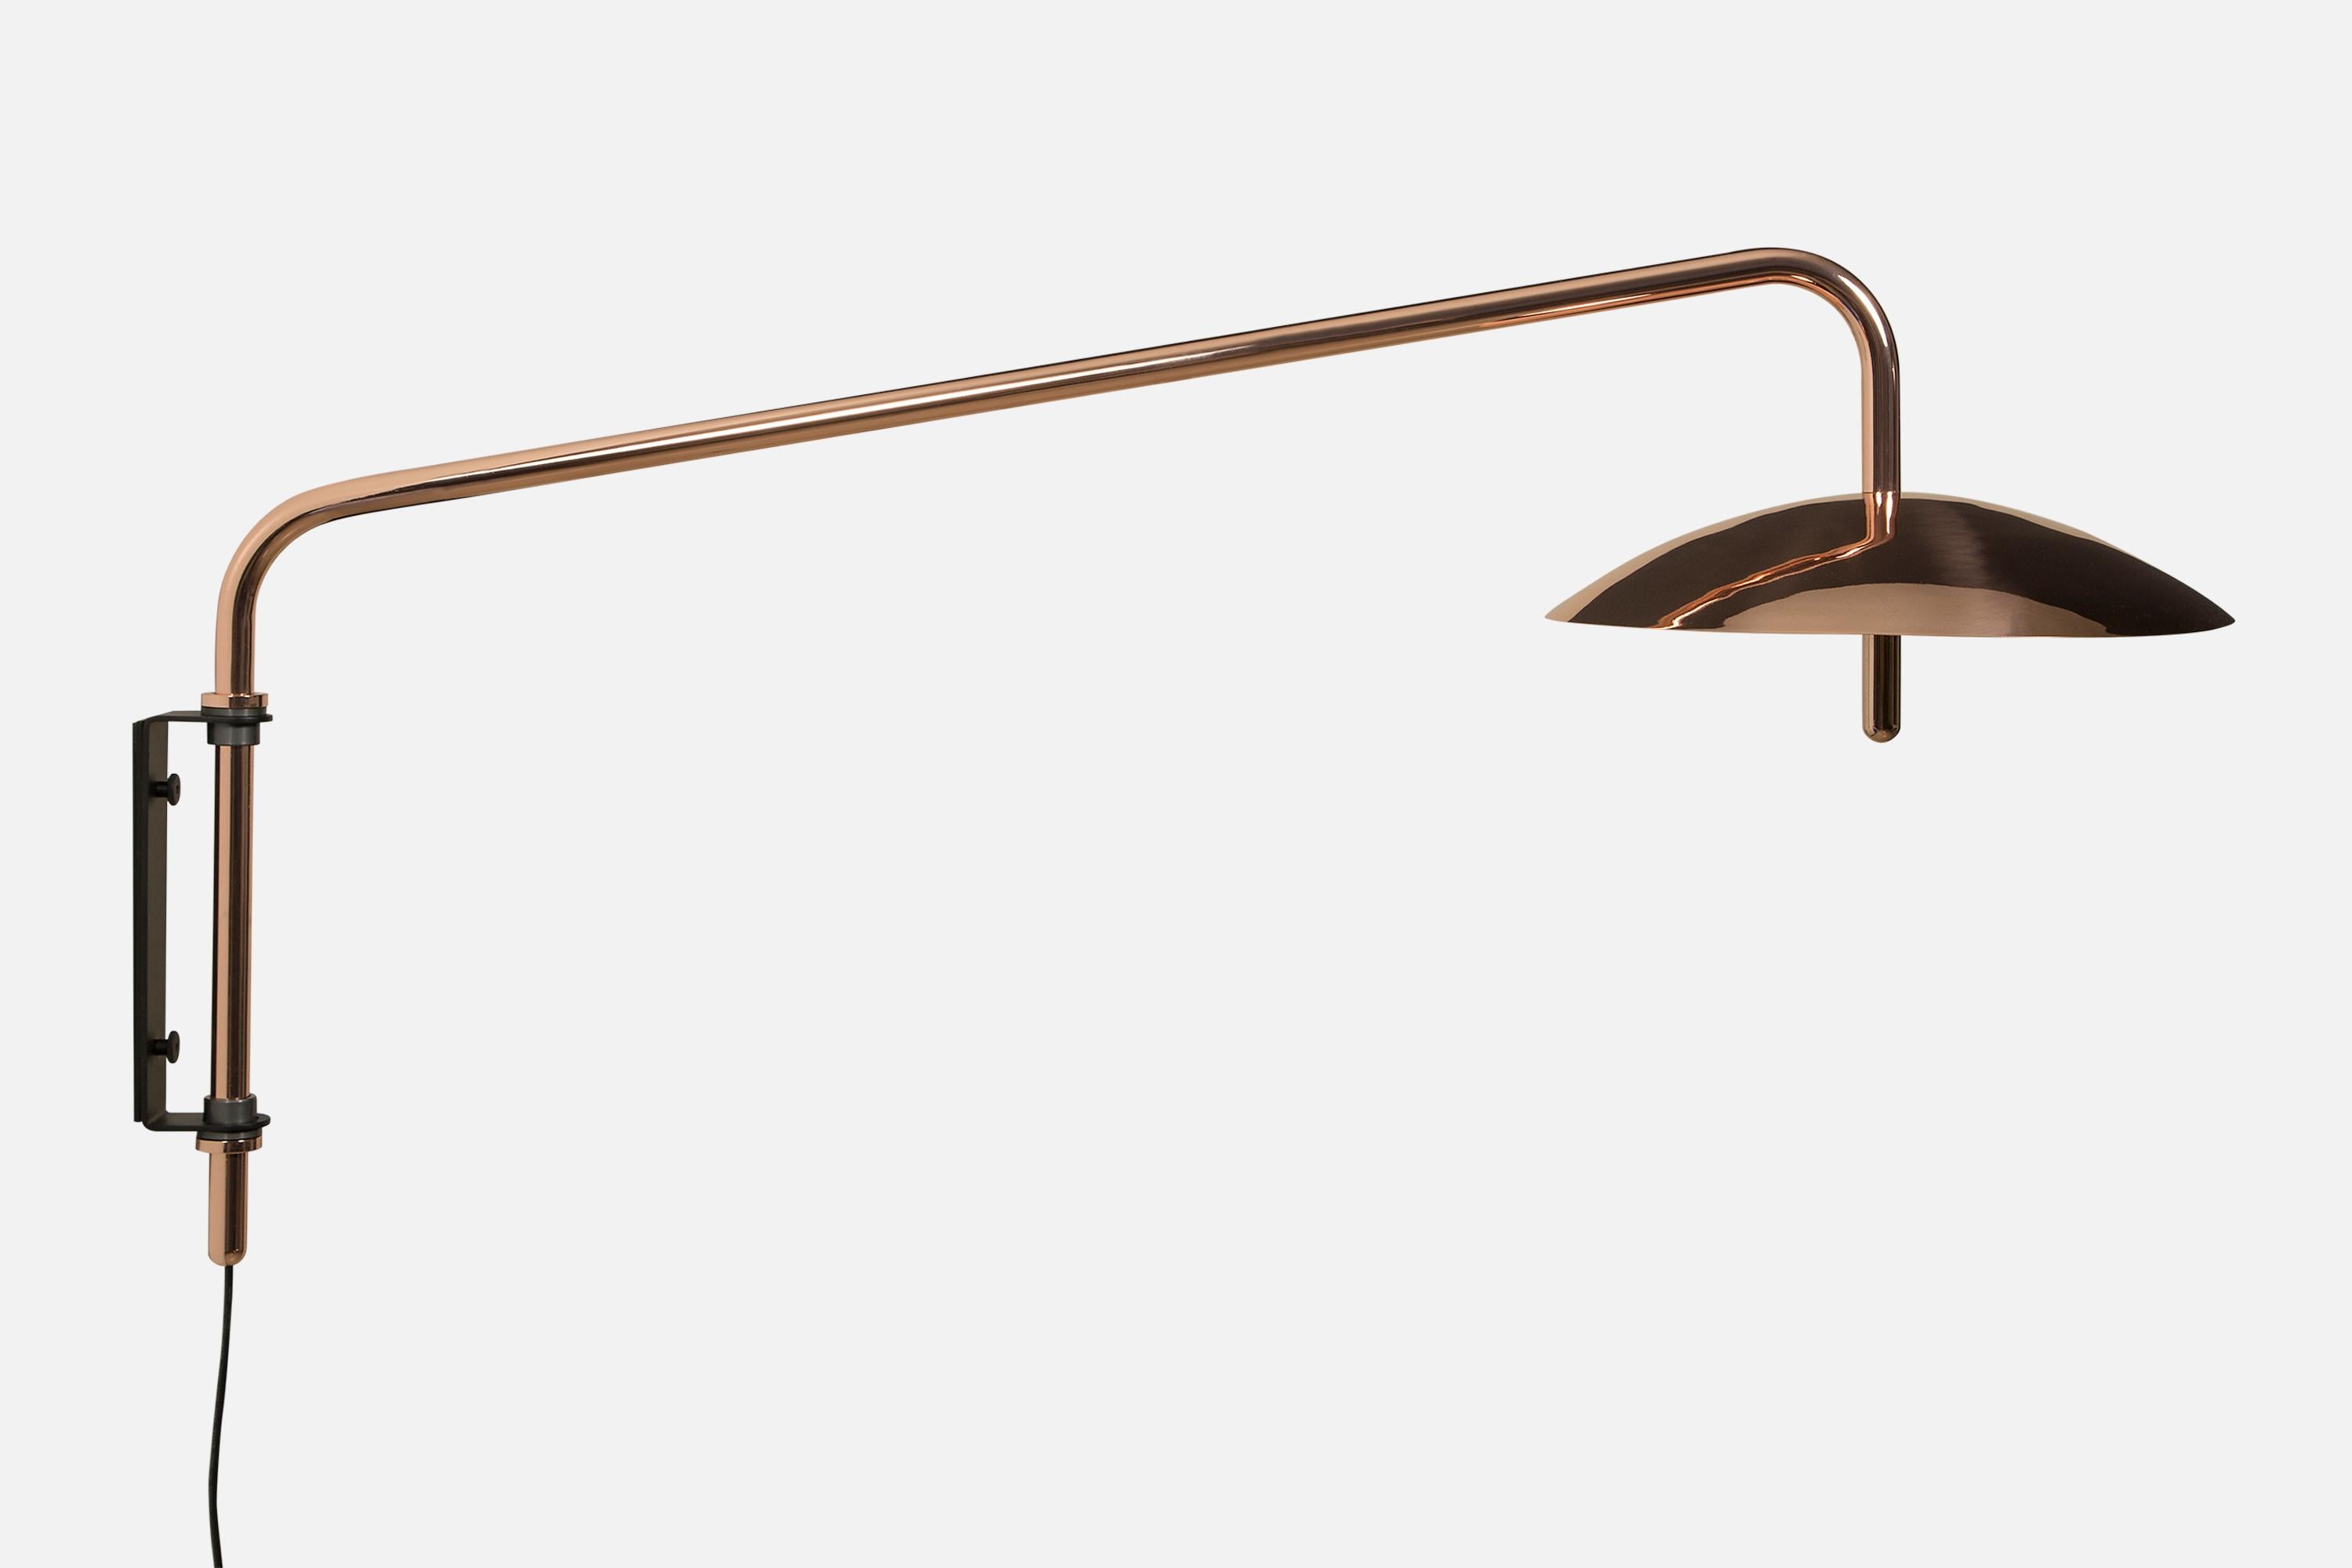 Contemporary Signal Arm Sconce in Black x Brass, Long, Hardwire, by Souda, Made to Order For Sale